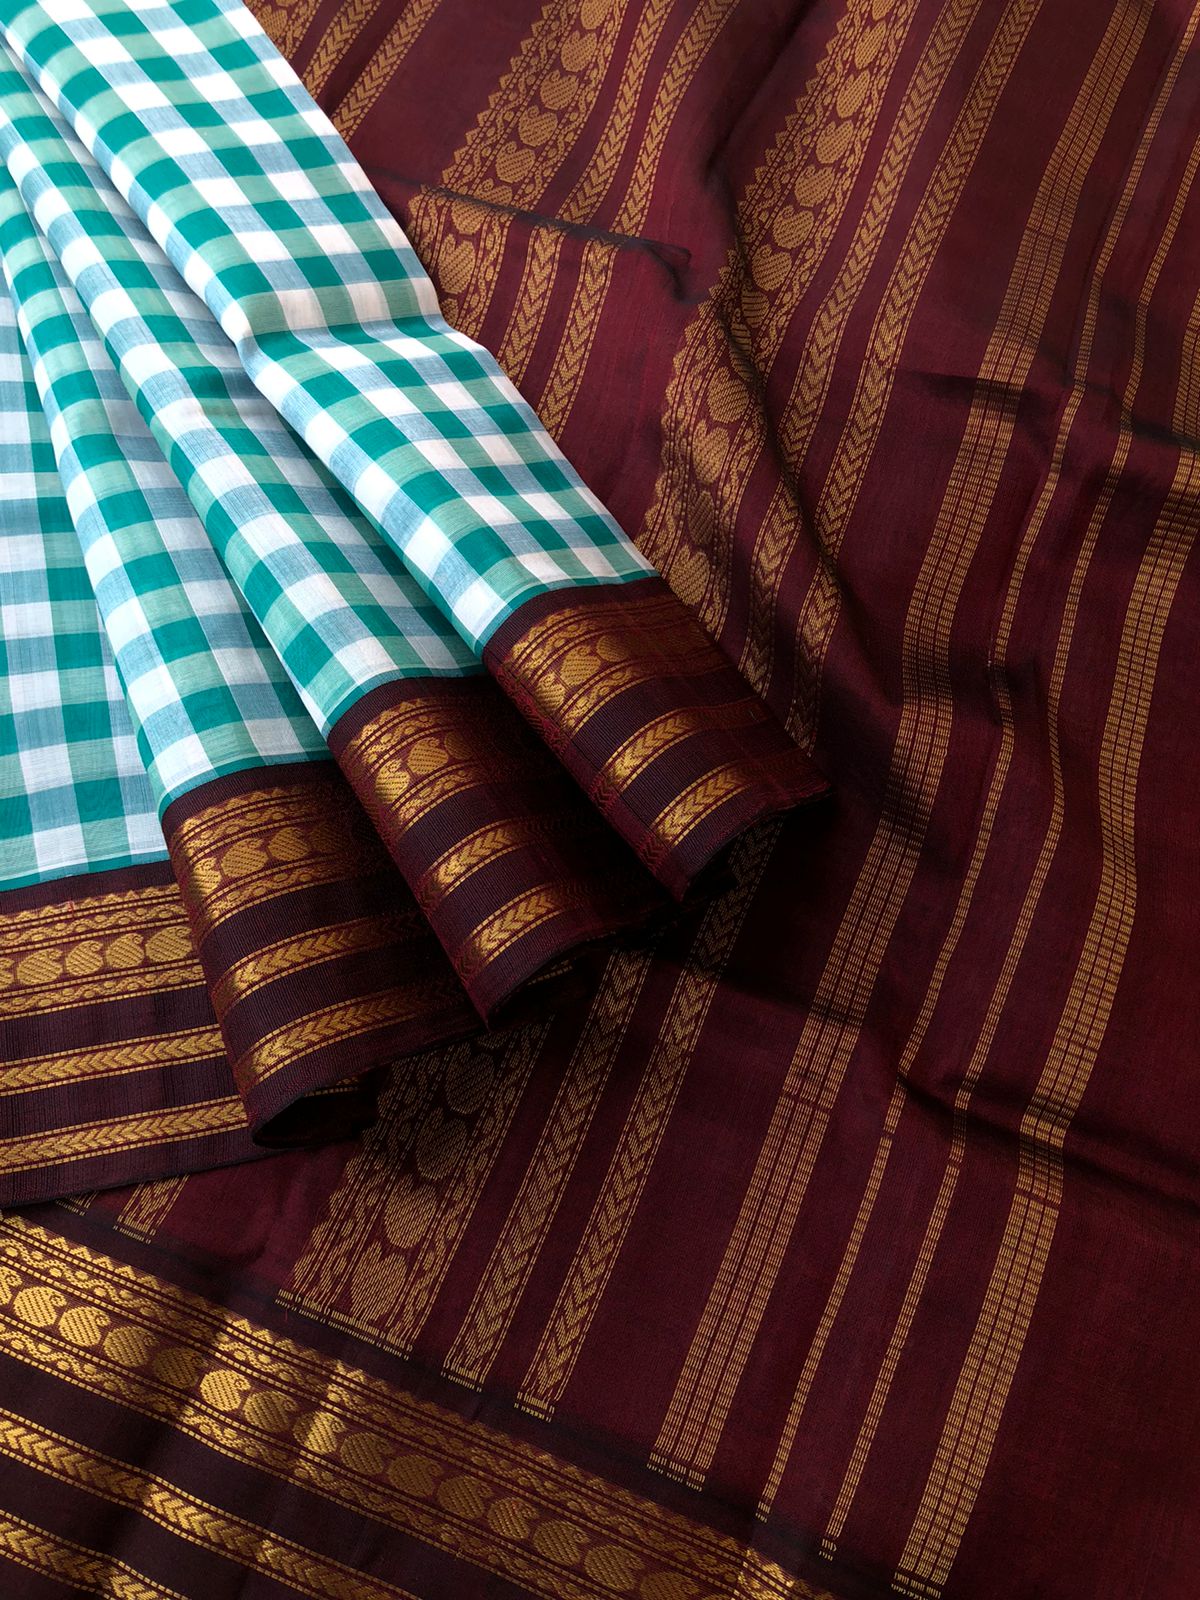 Paalum palamum kattam on Korvai Silk Cotton - off white and teal blue chex with deep maroon brown pallu and blouse